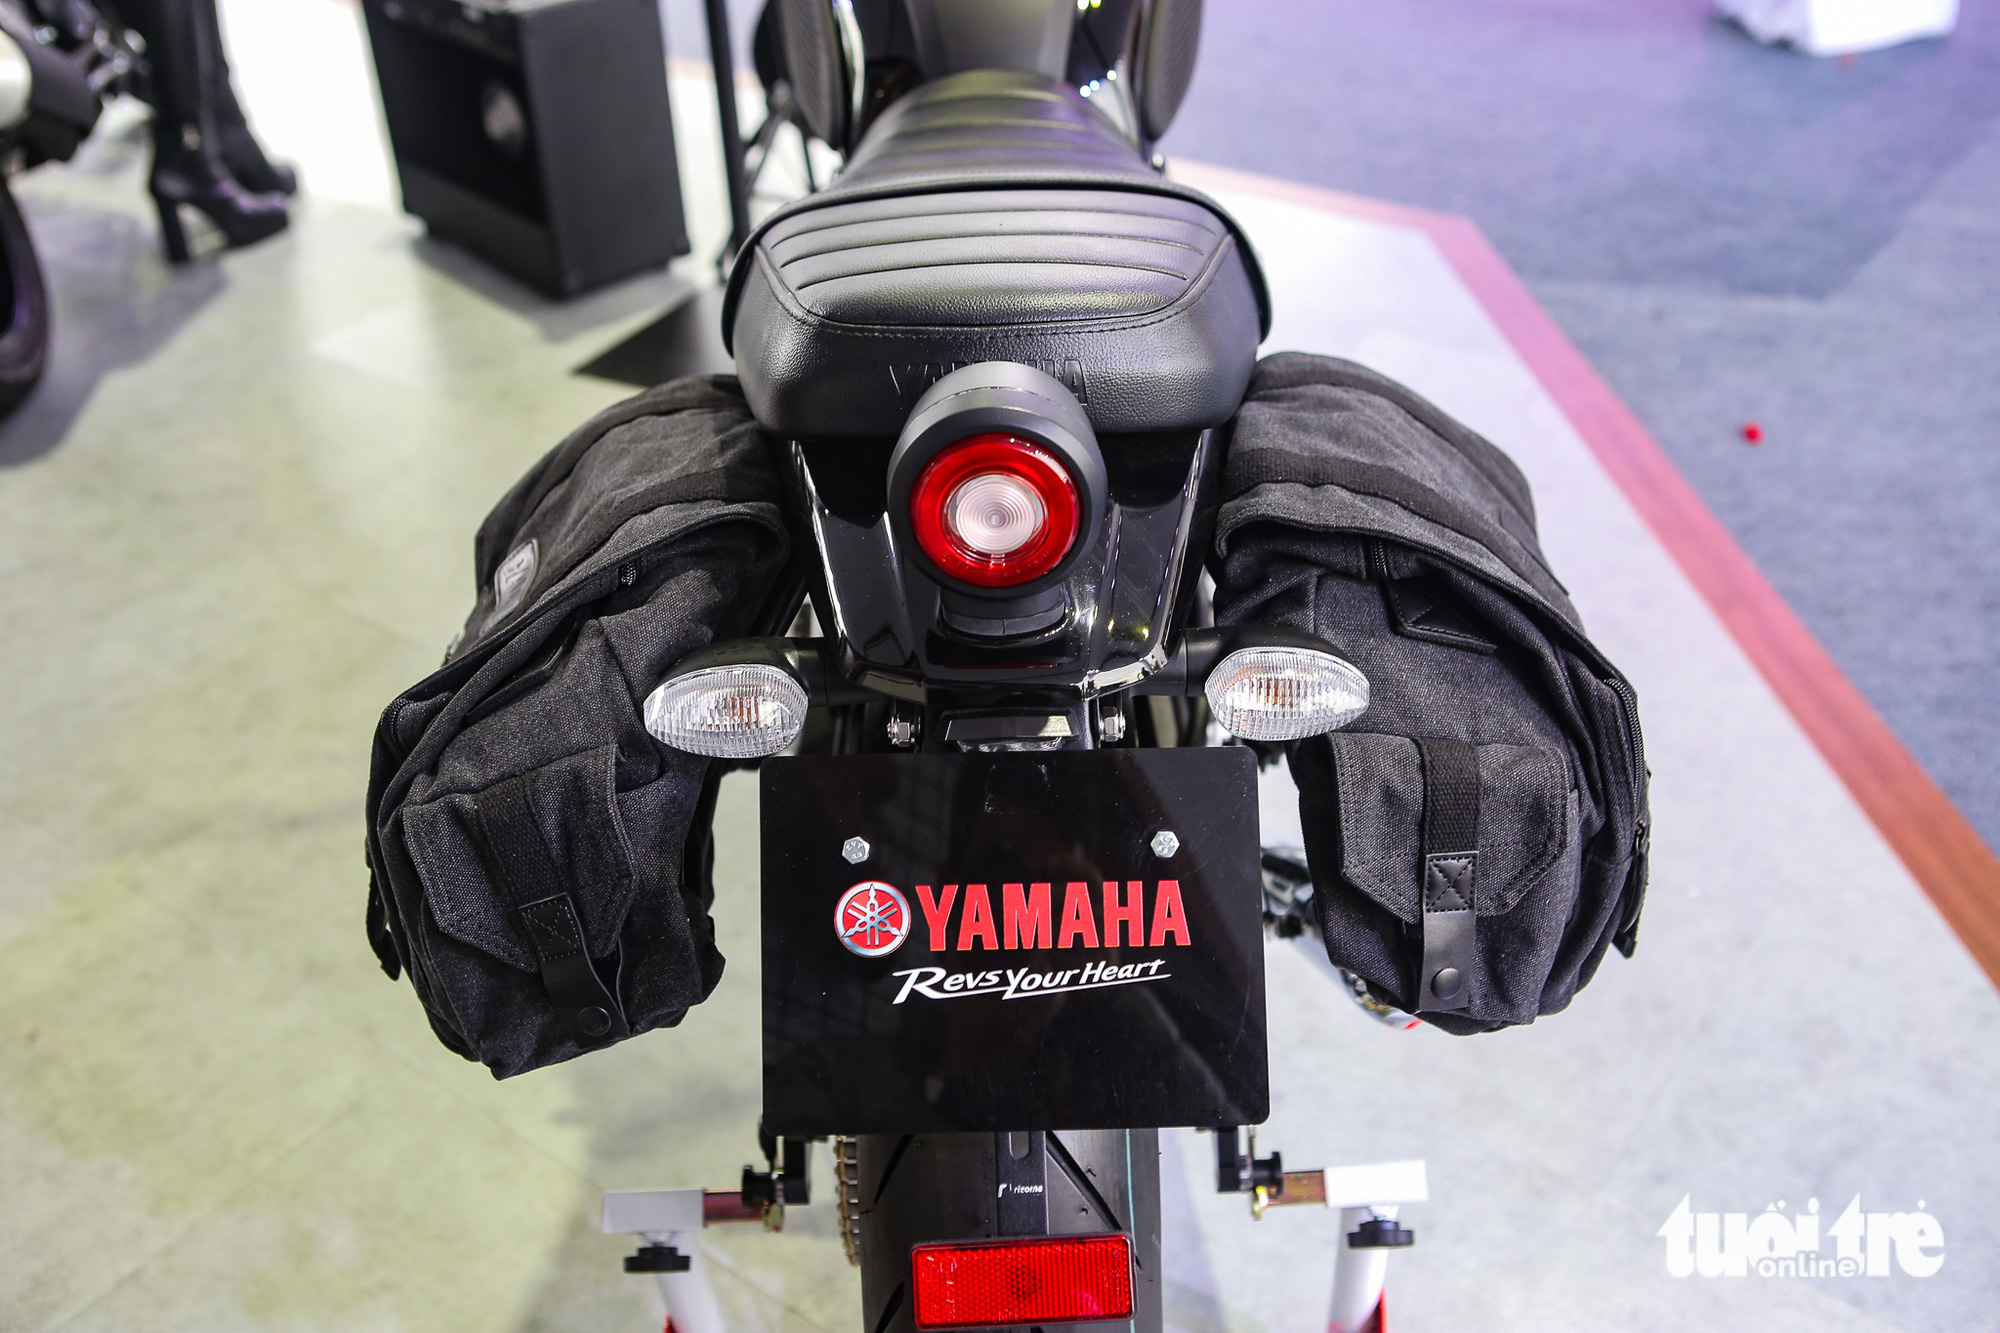 Yamaha XS155R adds more toys for Vietnamese travelers who love to travel - Photo 5.